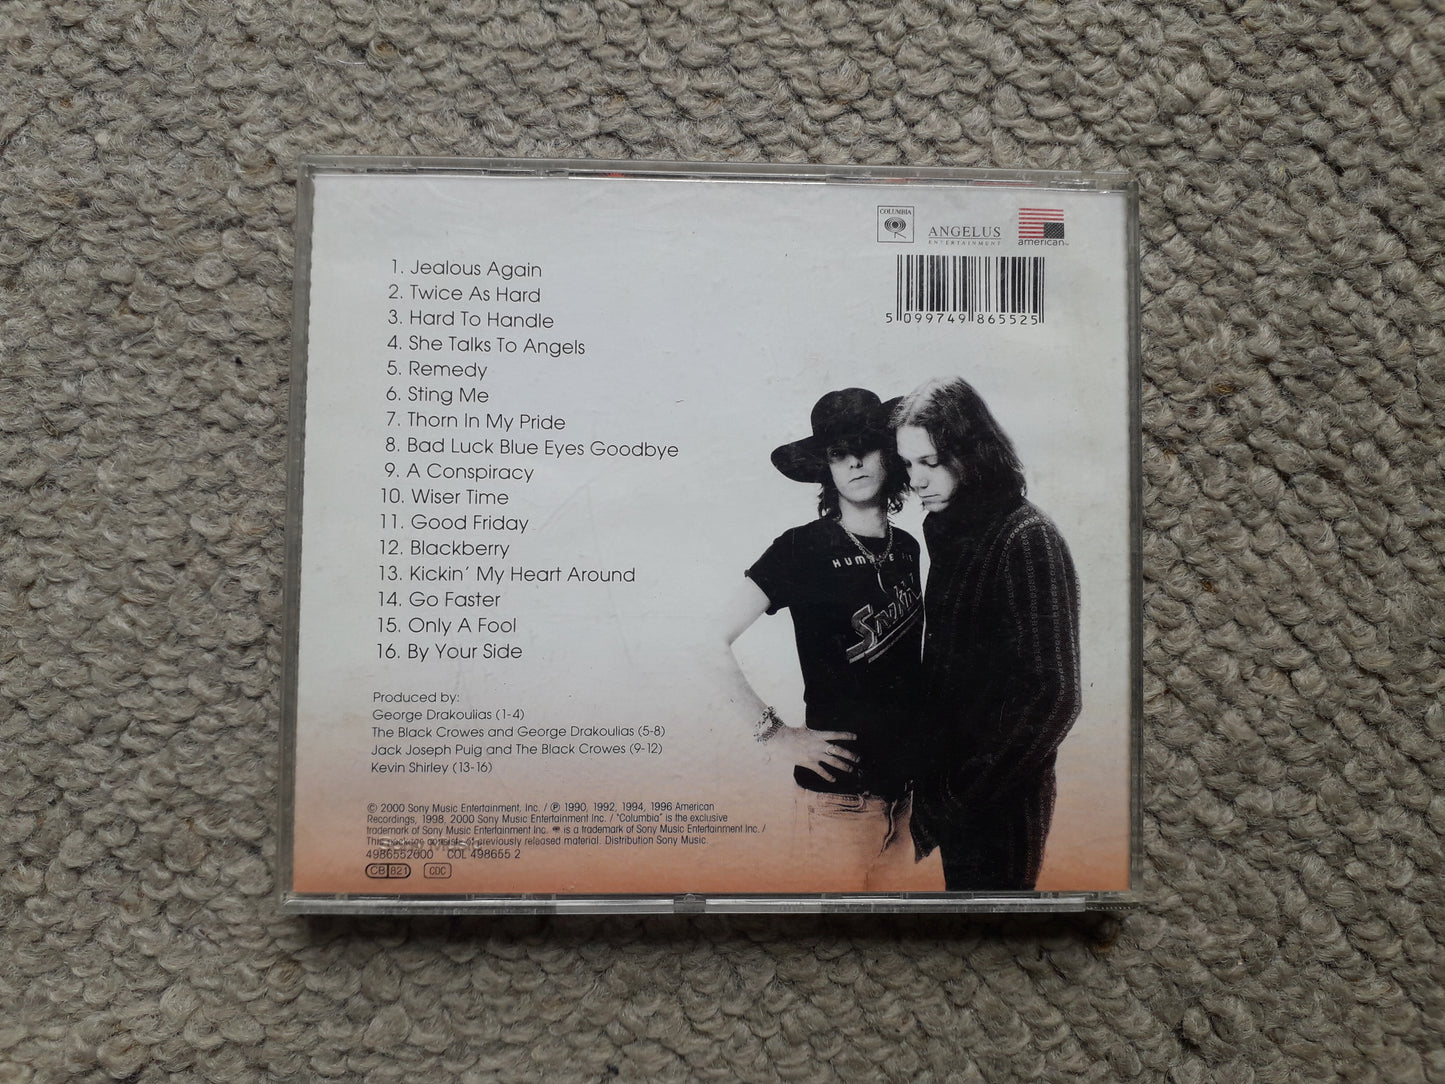 The Black Crowes-Greatest Hits 1990-1999 A Tribute To A Work In Progress CD